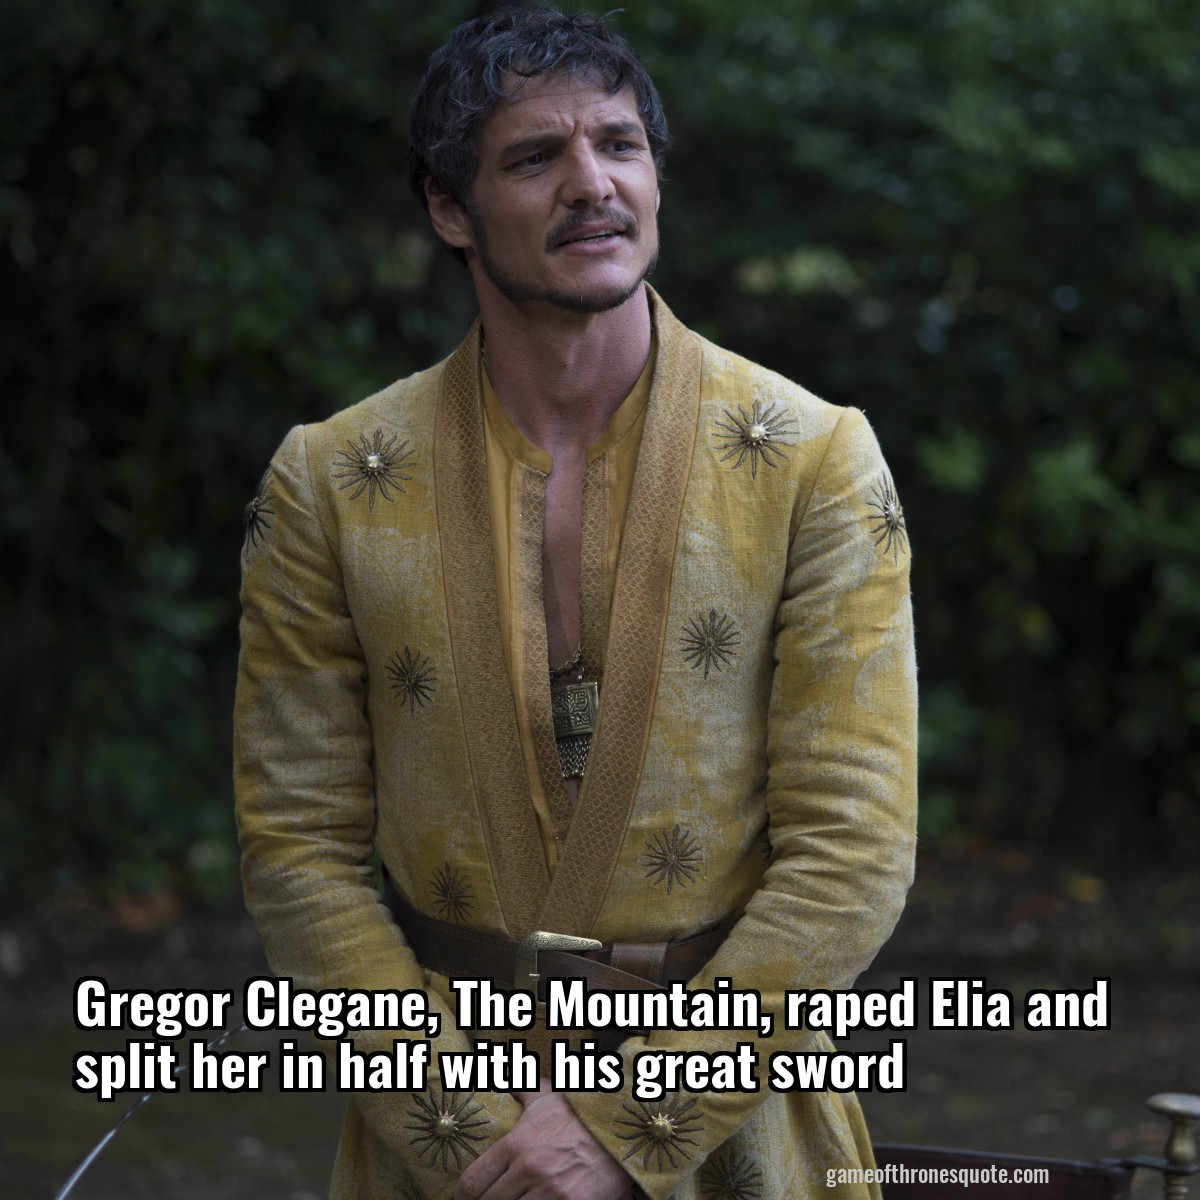 Gregor Clegane, The Mountain, killed Elia and split her in half with his great sword